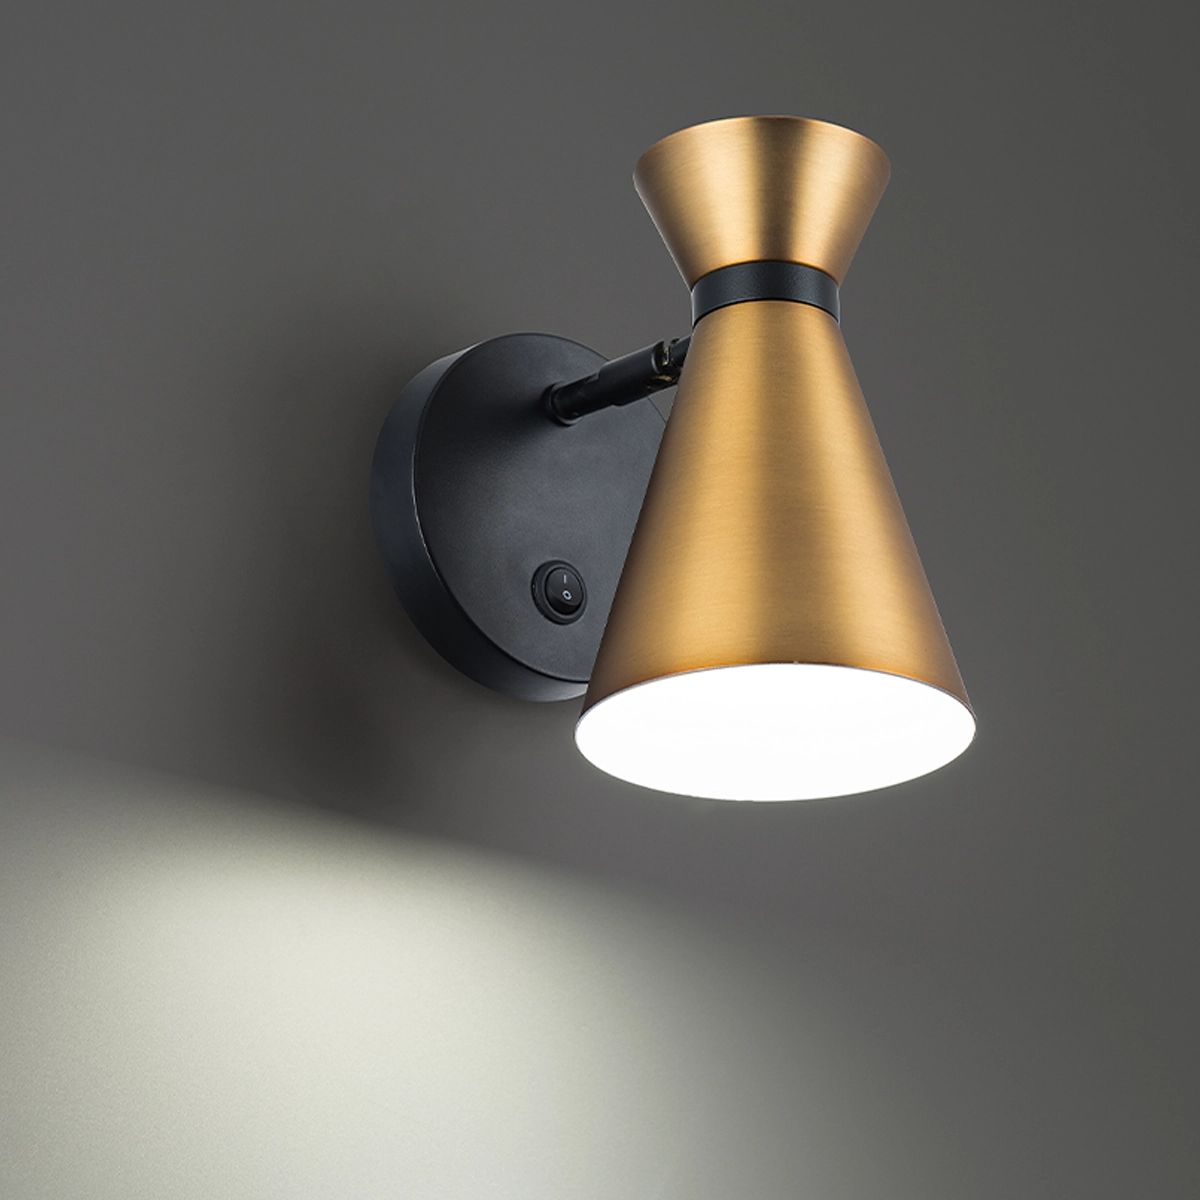 Pin Up 8 in. LED Wall Sconce with swing arm 3000K Aged Brass & Black Finish